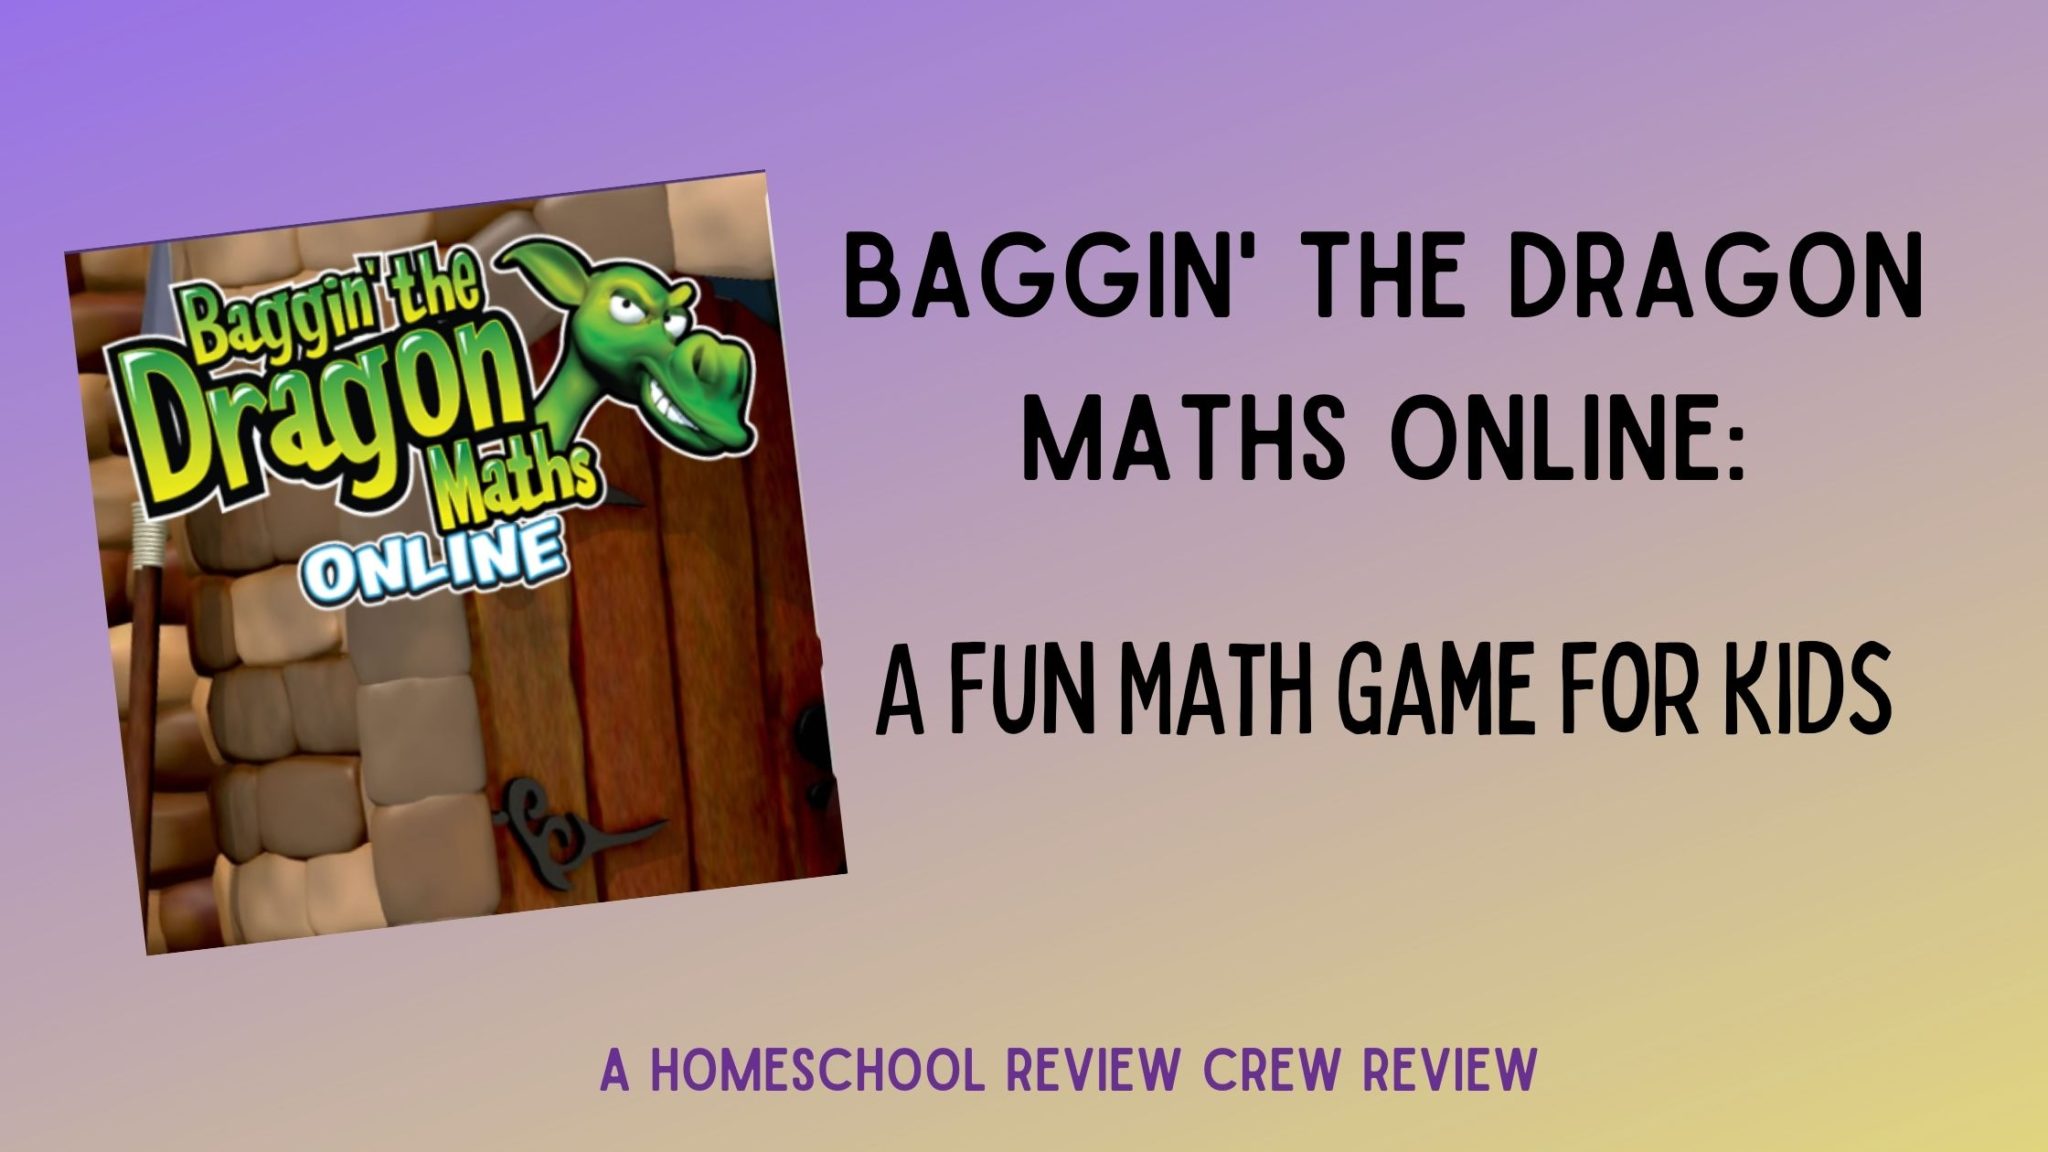 You are currently viewing Baggin’ the Dragon Maths Online: Fun Math Game for Kids